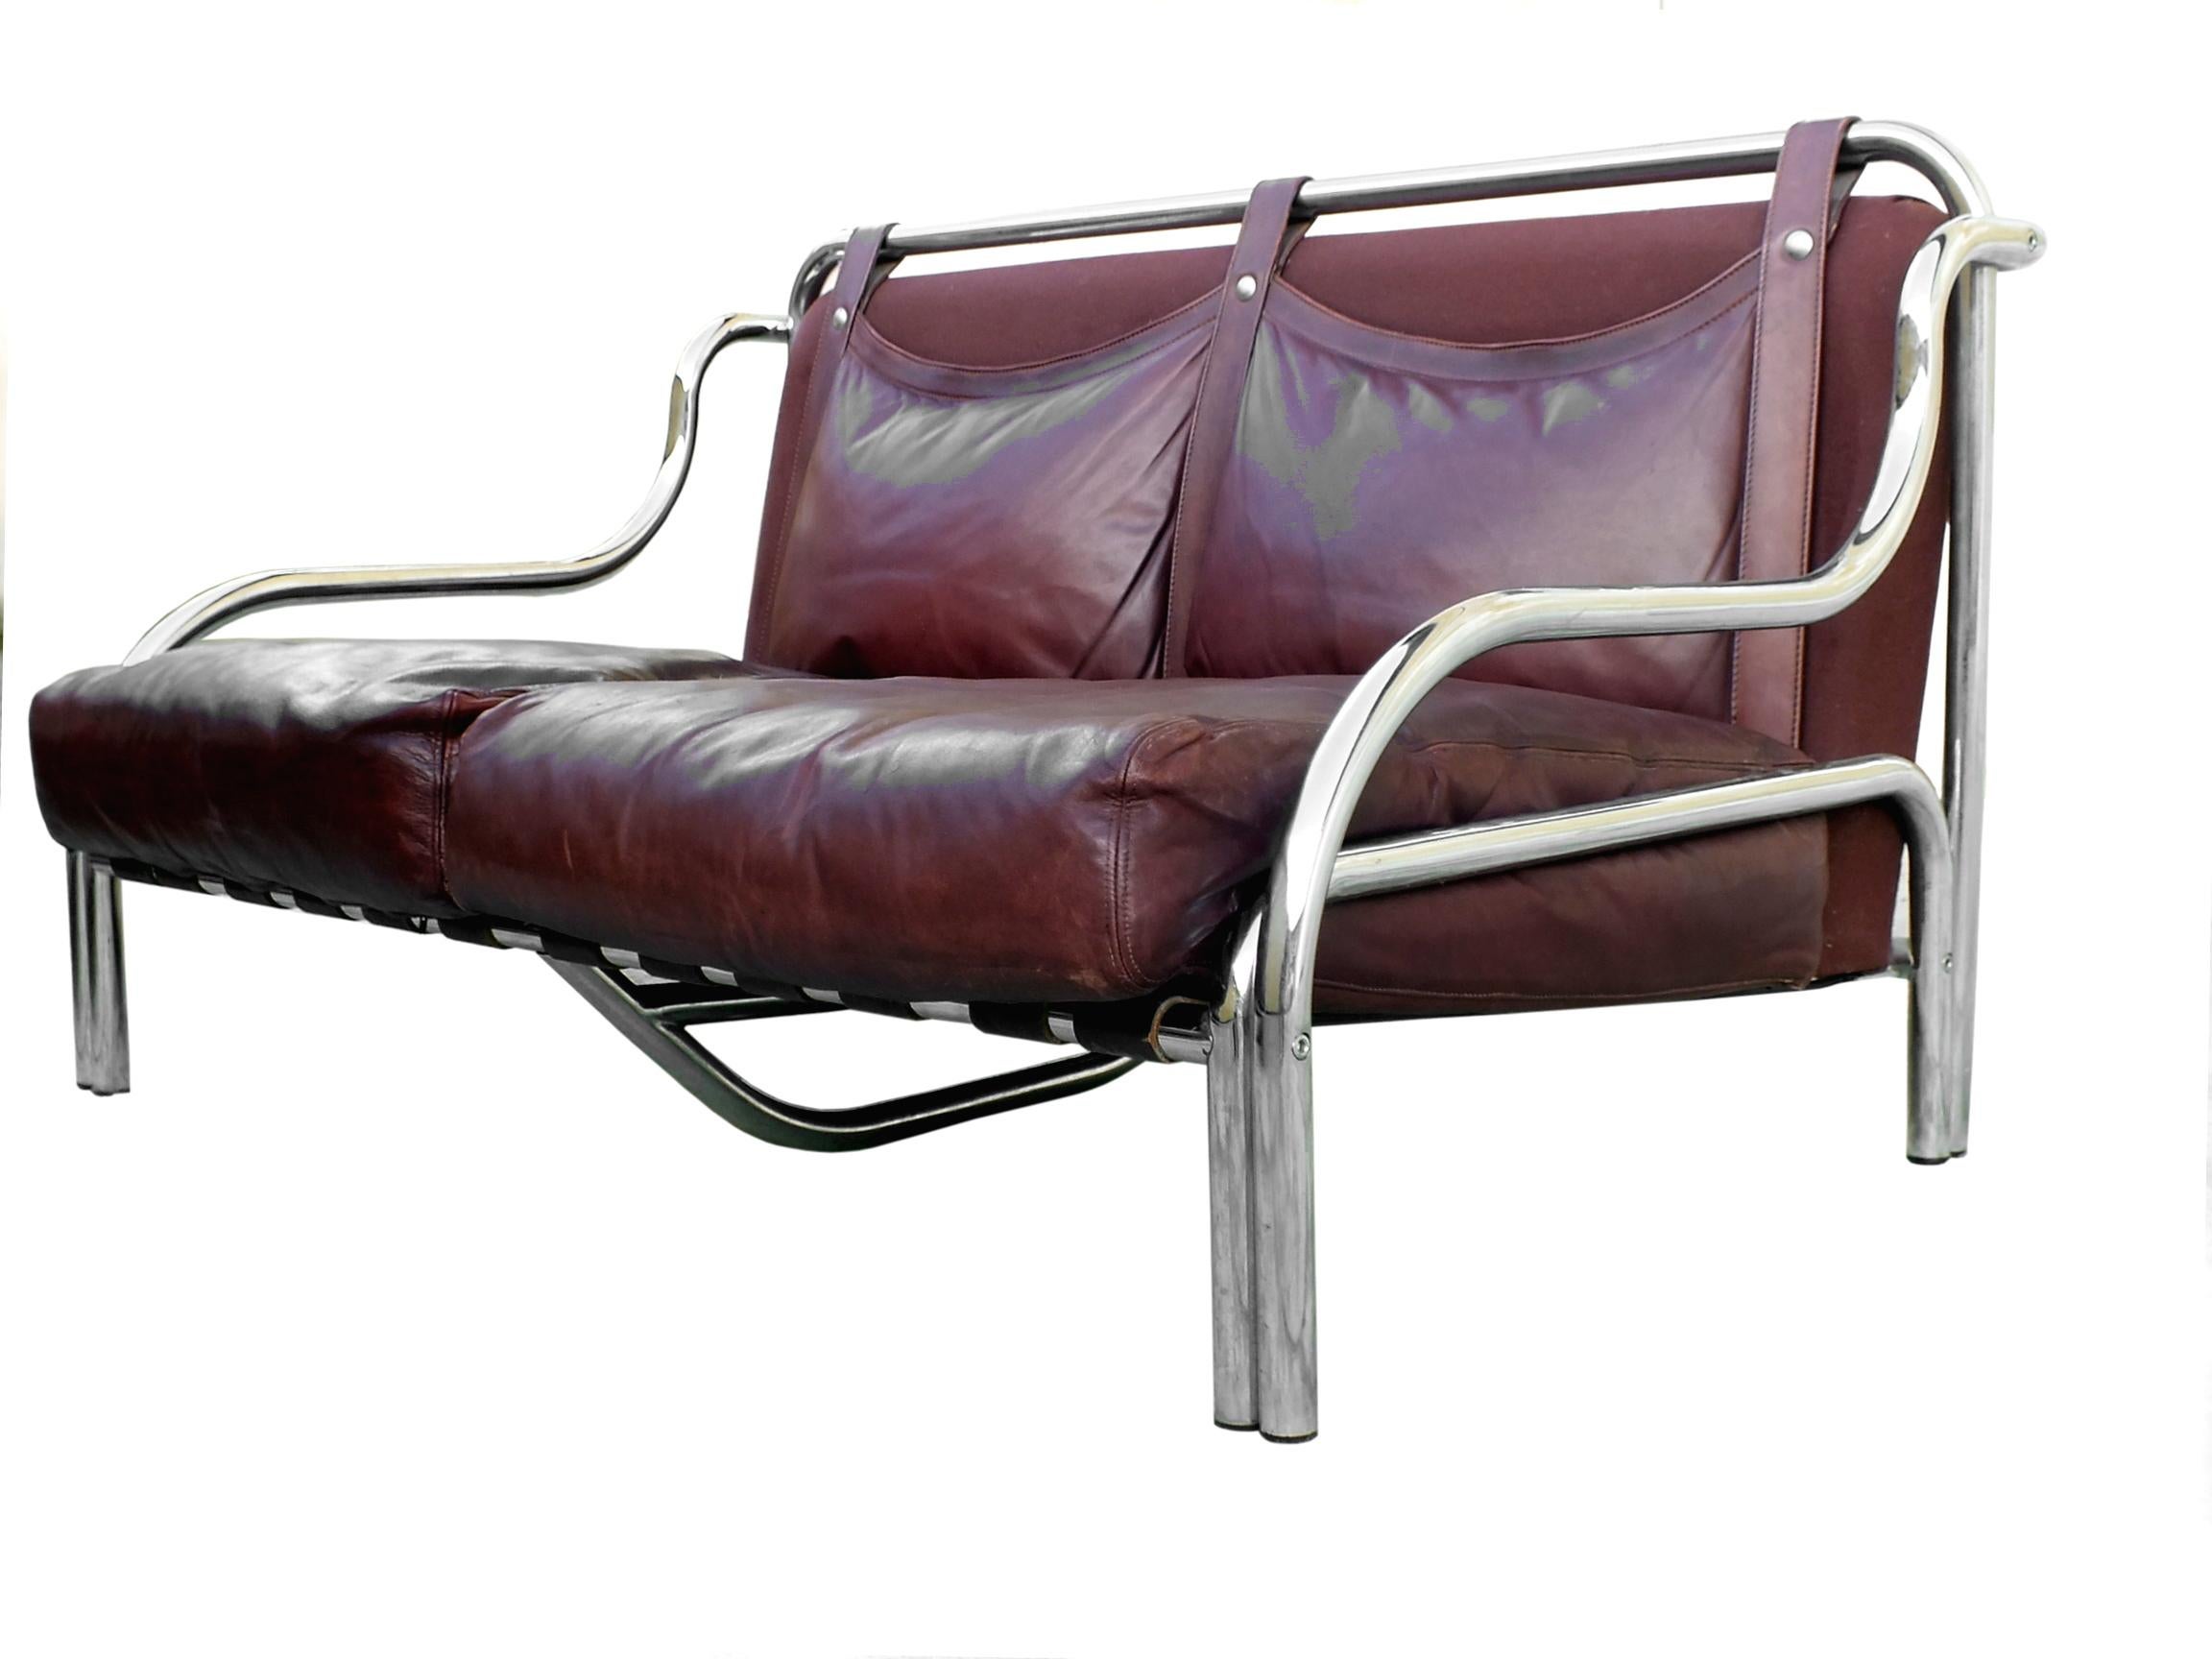 Pair of Vintage Sofas by Gae Aulenti Production Poltronova, Italy, 1965 For Sale 1